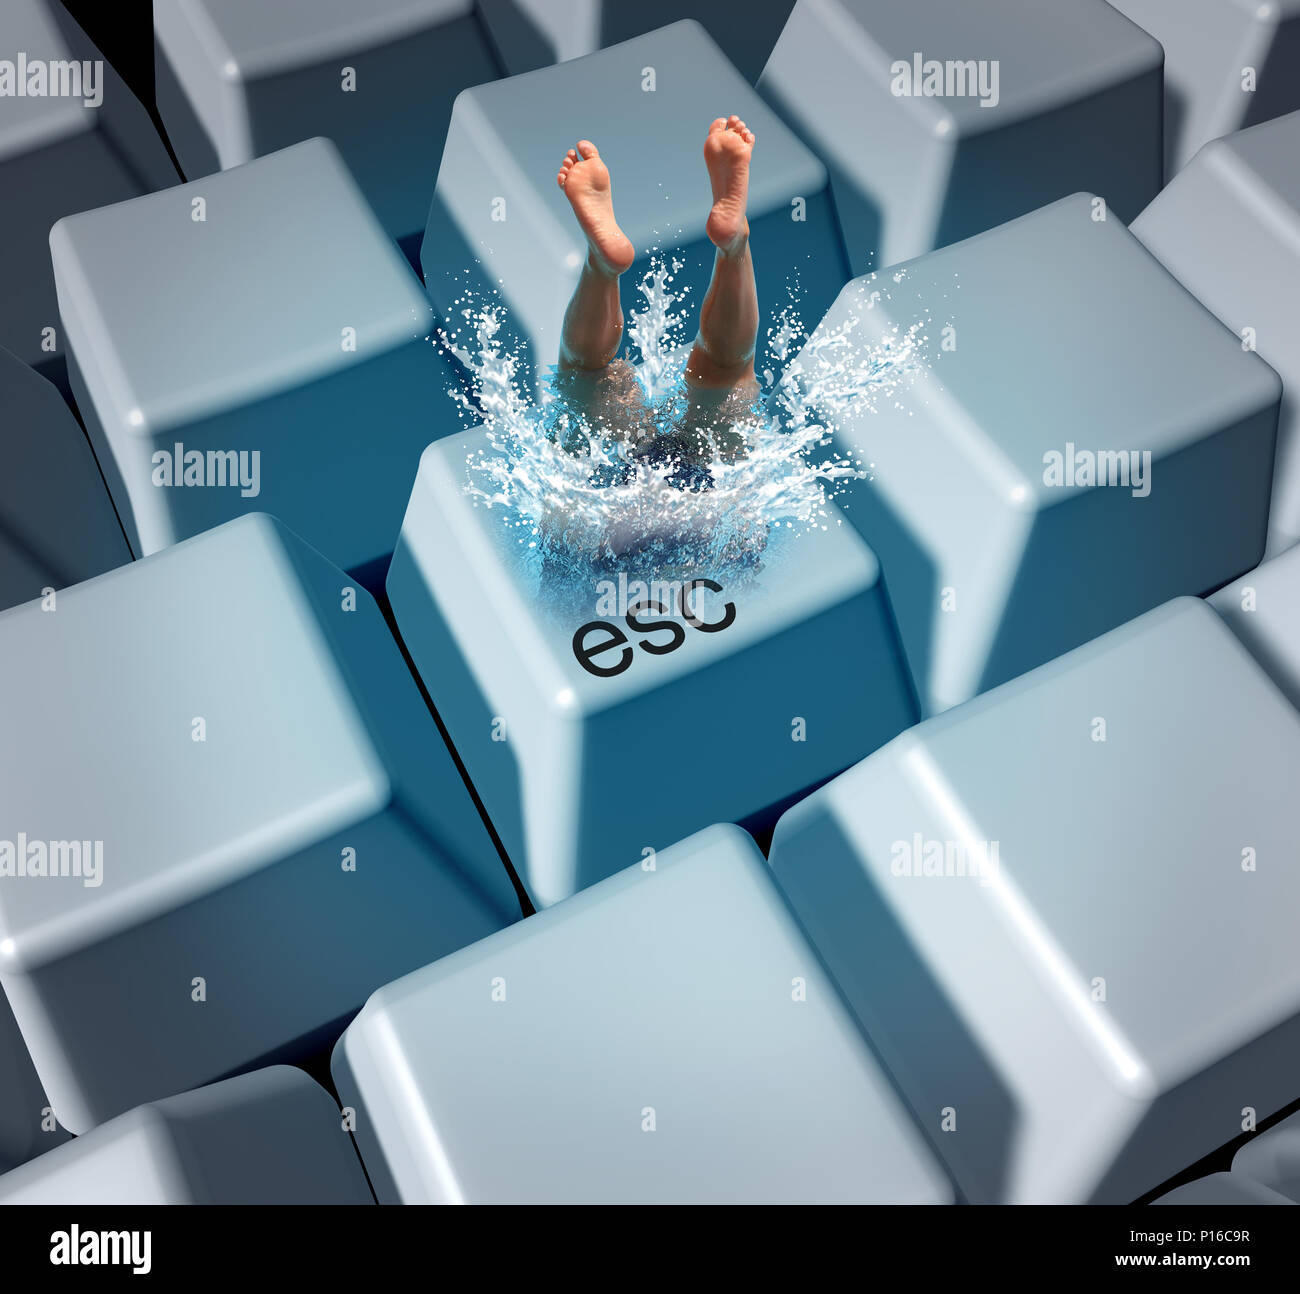 Work escape and office rest and relaxation concept as an employee worker diving into a computer keyboard with 3D illustration elements. Stock Photo